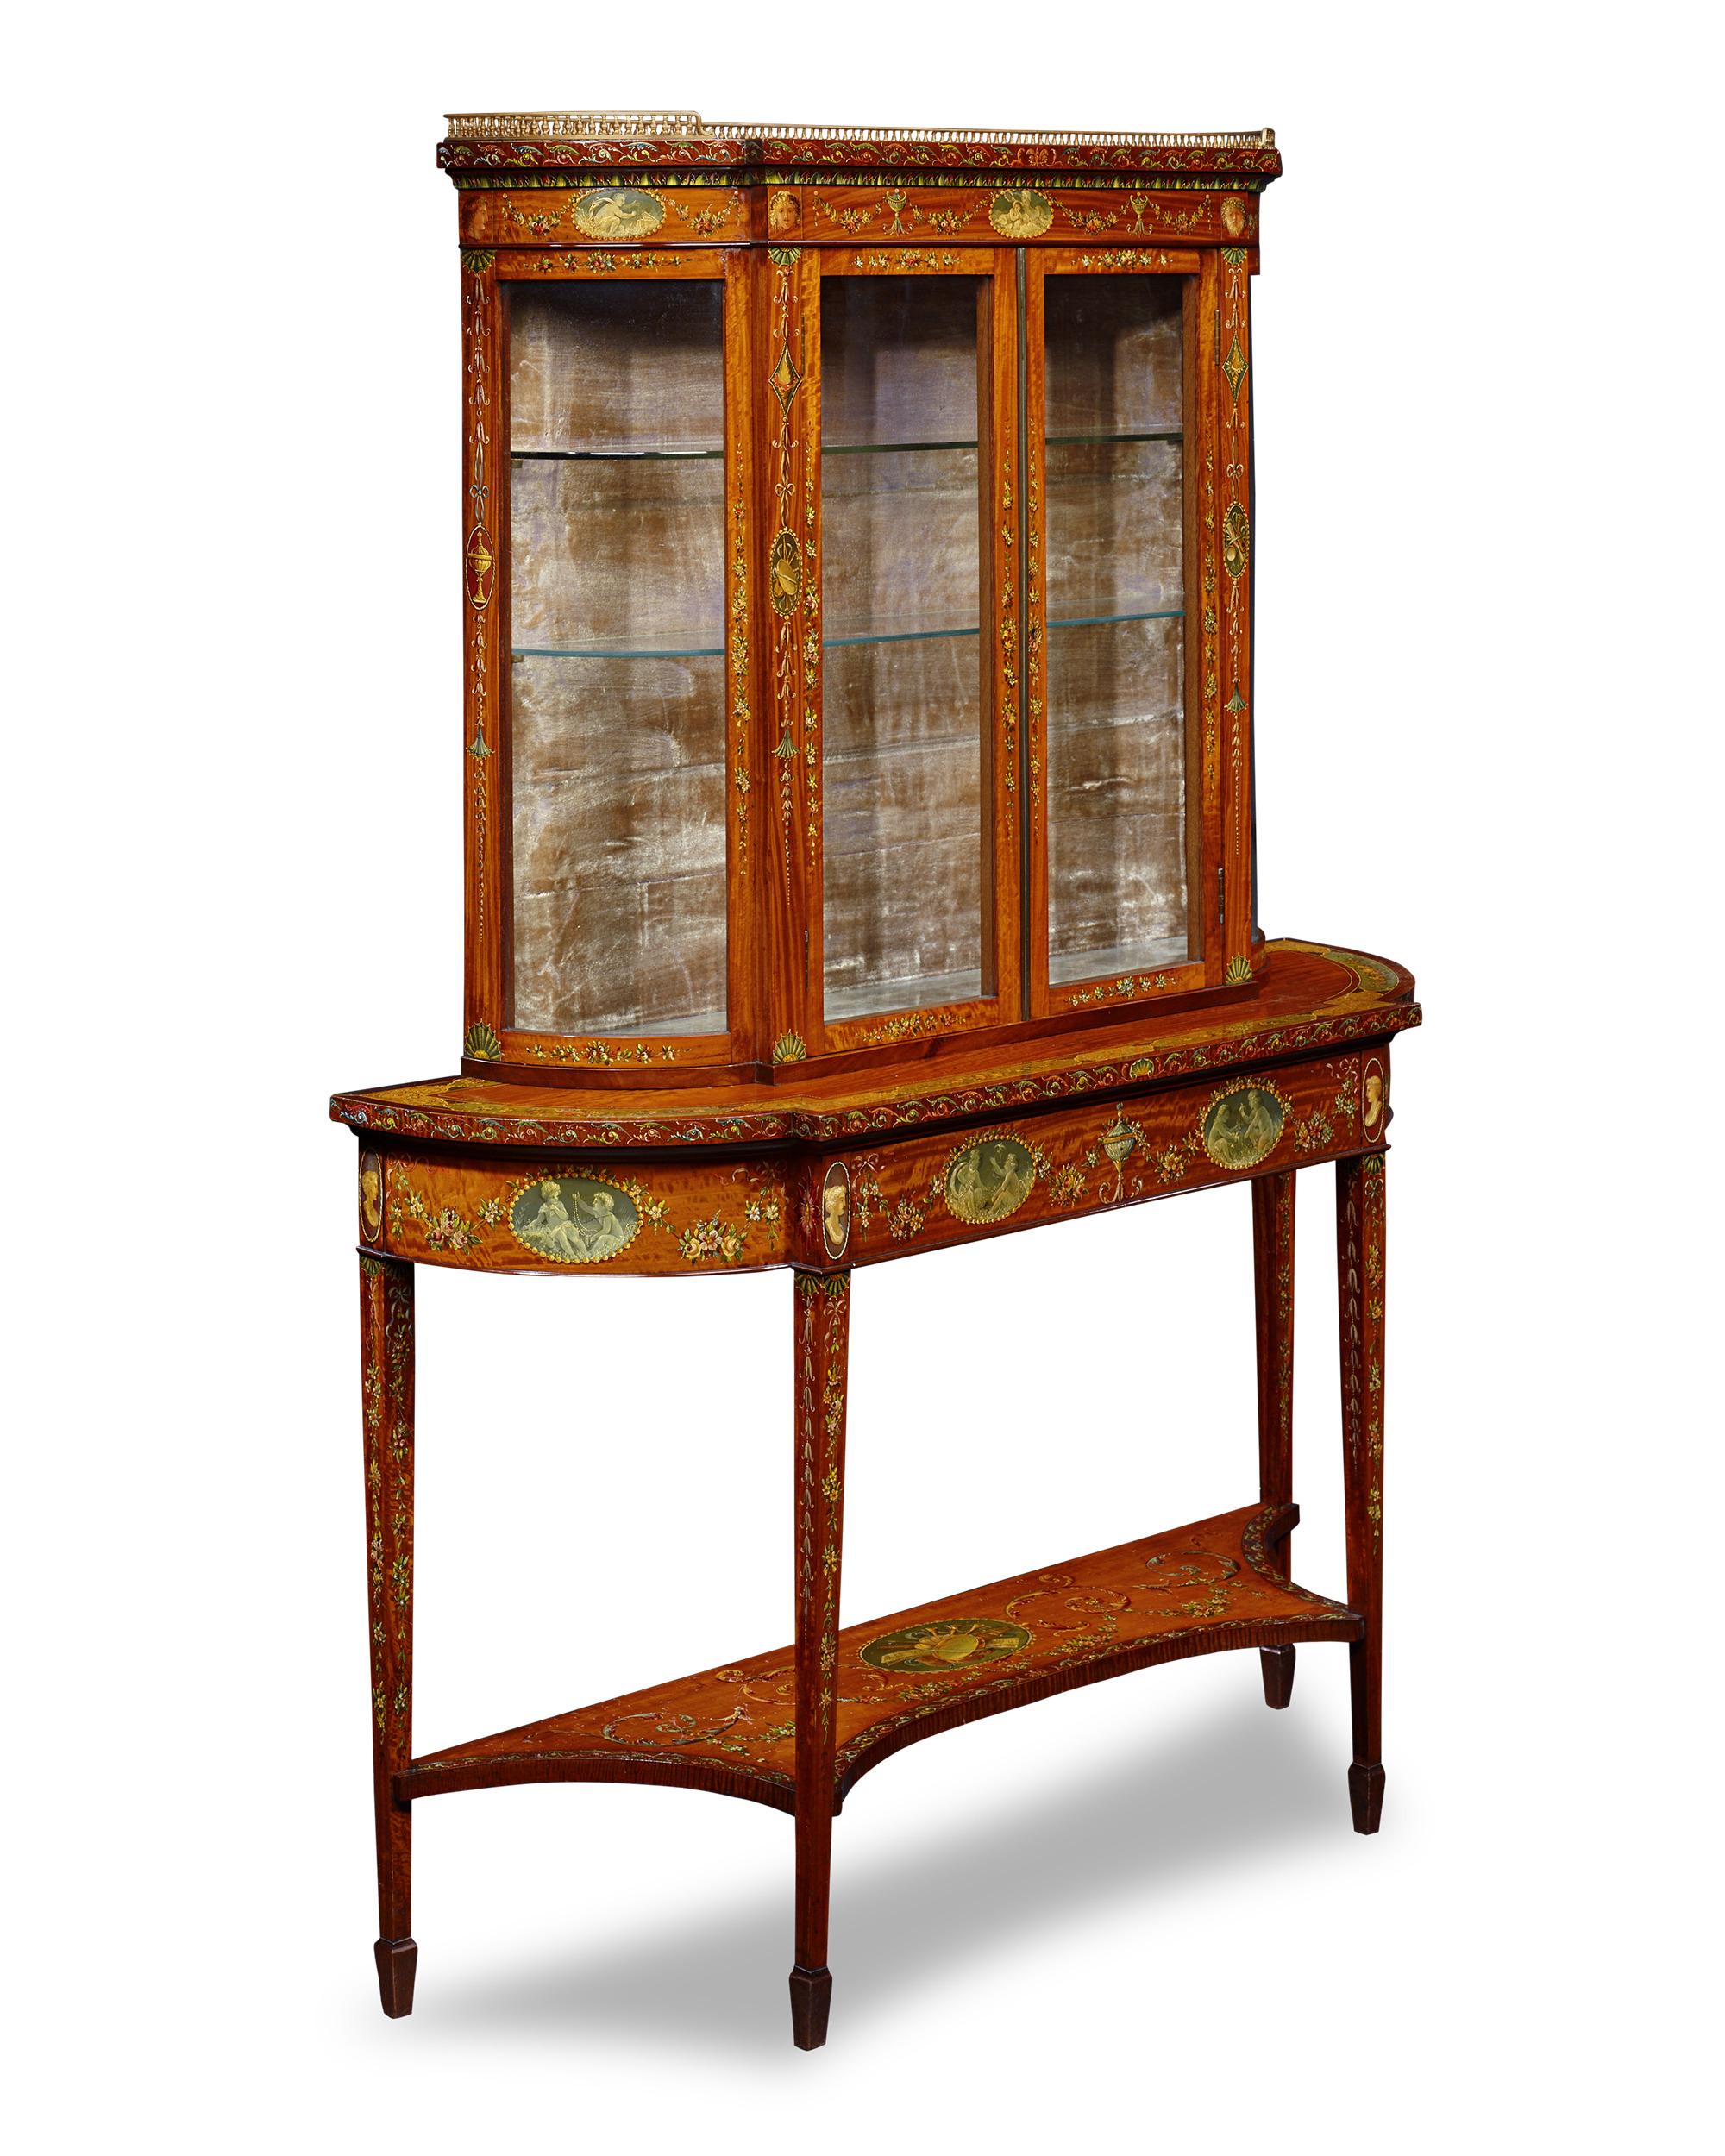 This exceptional English vitrine features the stylistic elements associated with the famed English furniture designer Thomas Sheraton, considered one of the three most influential English cabinetmakers along with Thomas Chippendale and George